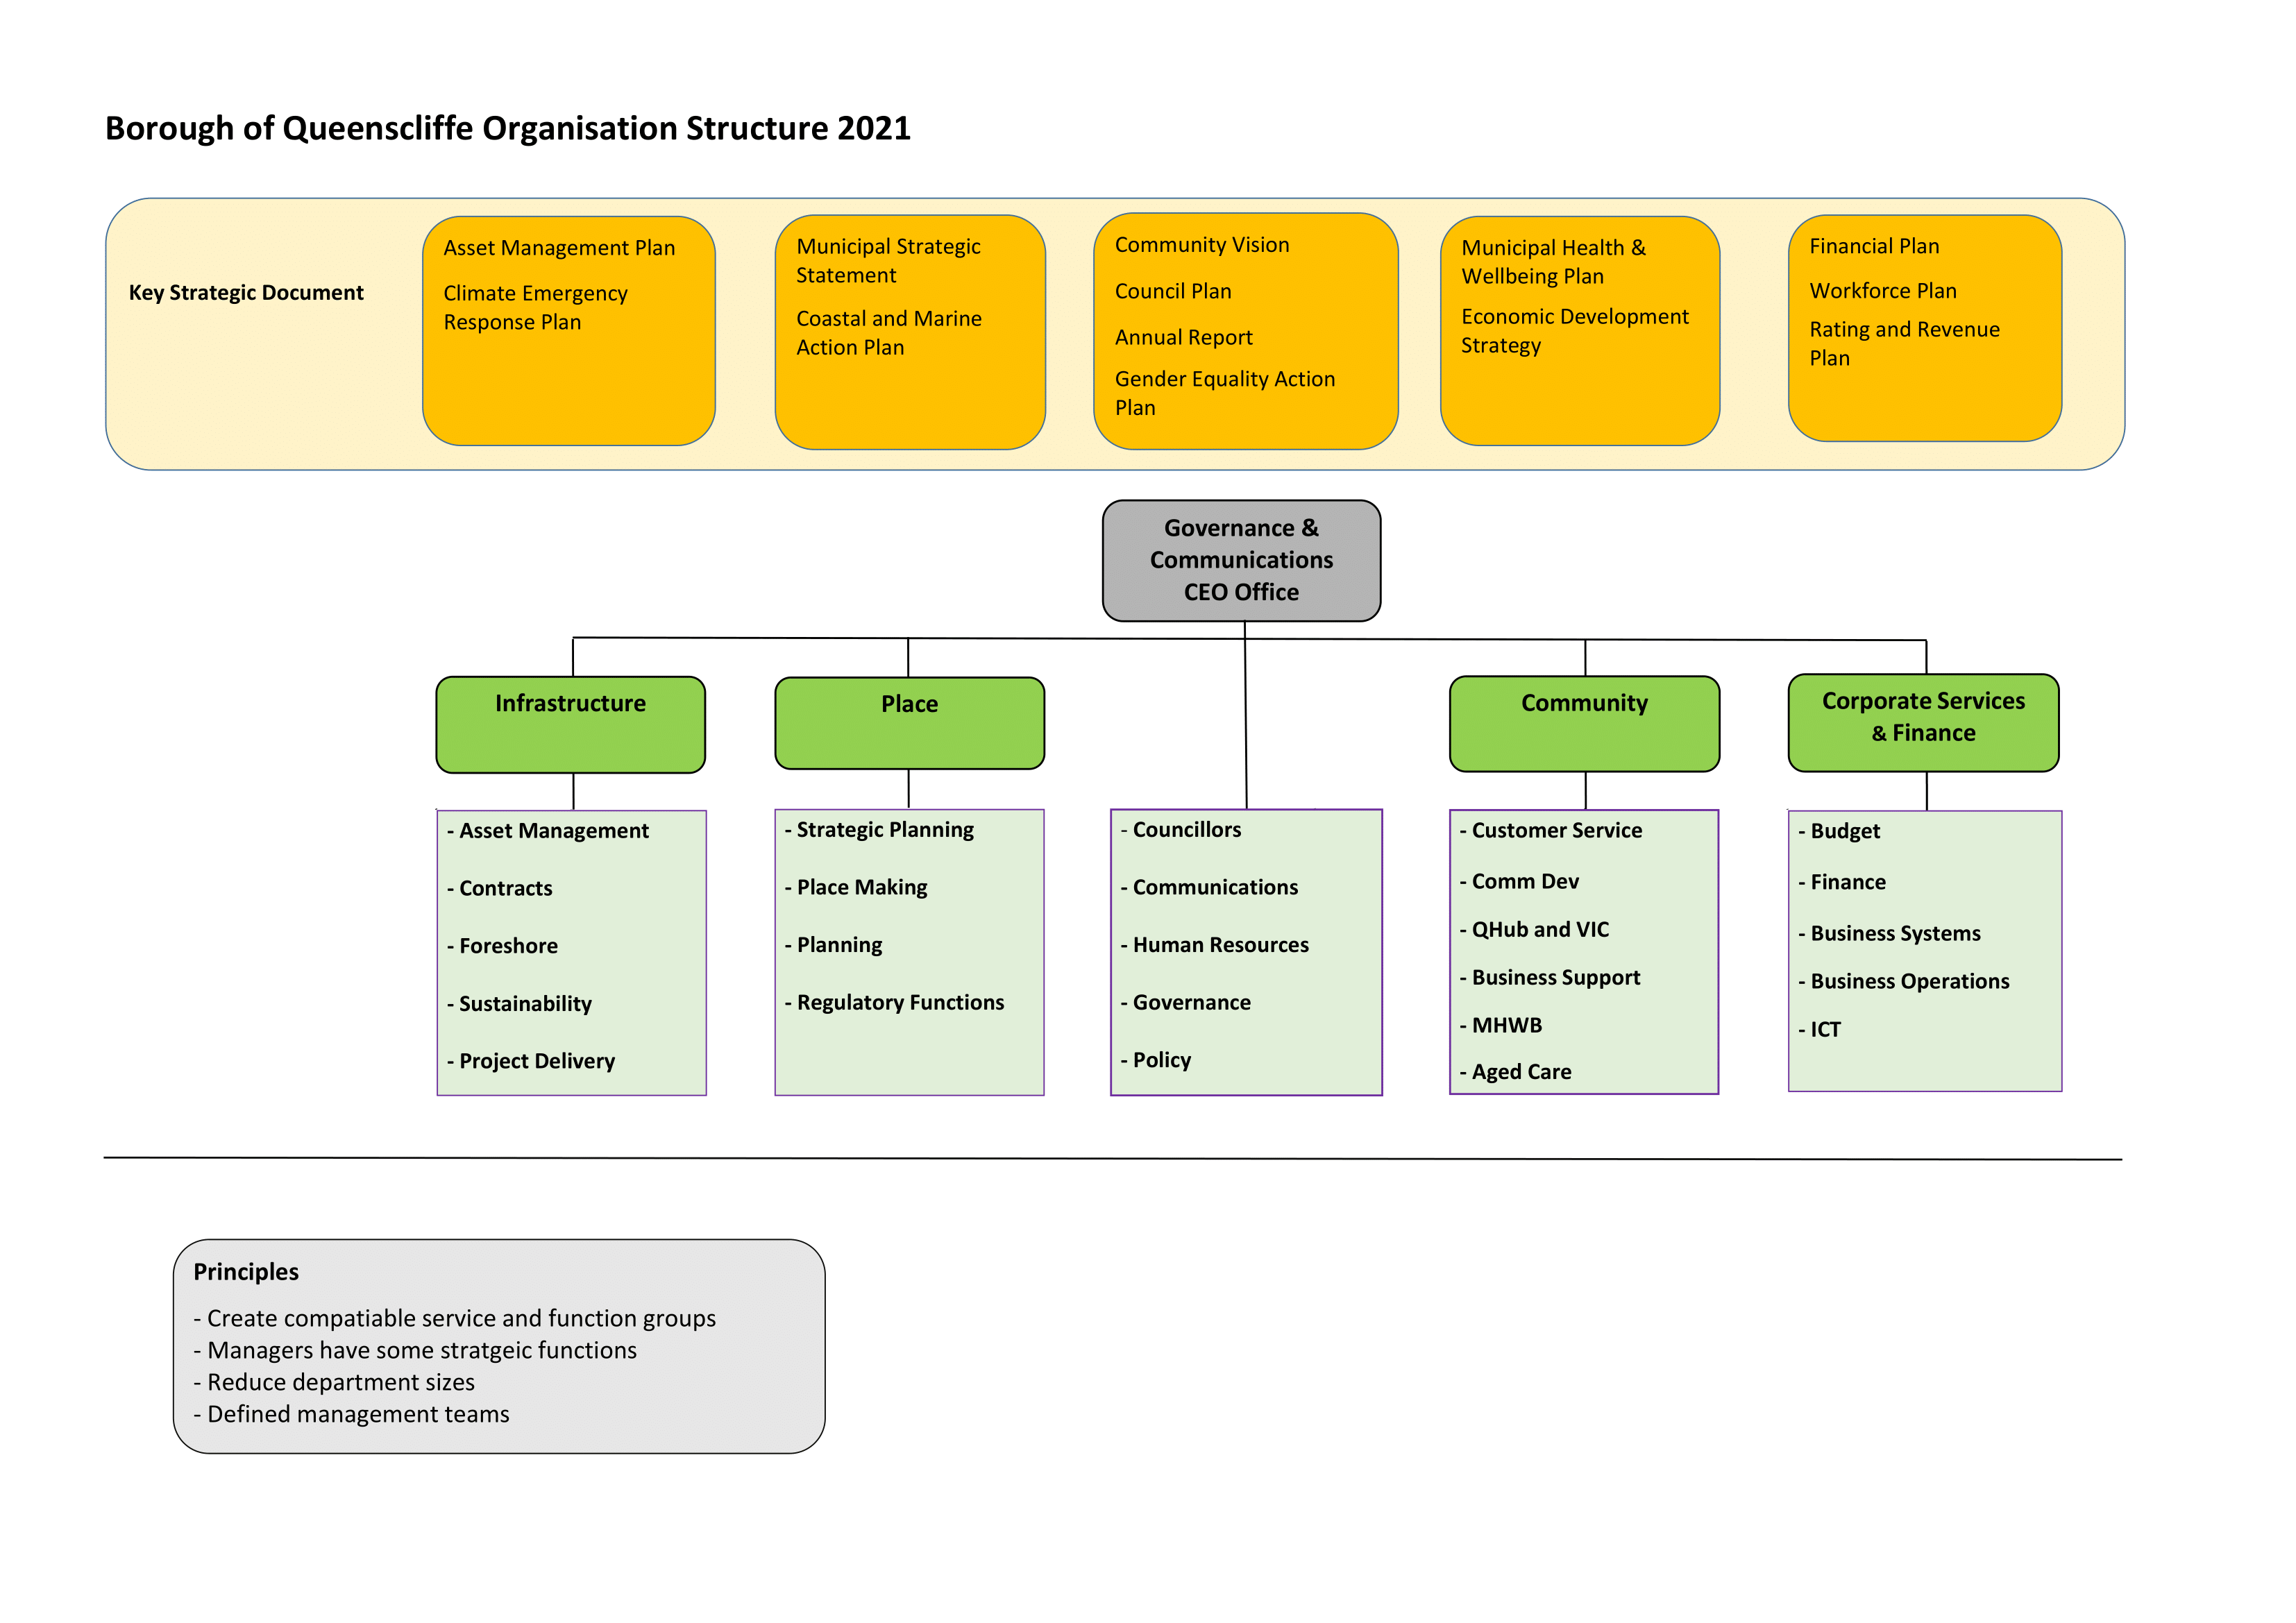 BoQ-Organisation-Structure-2021.png